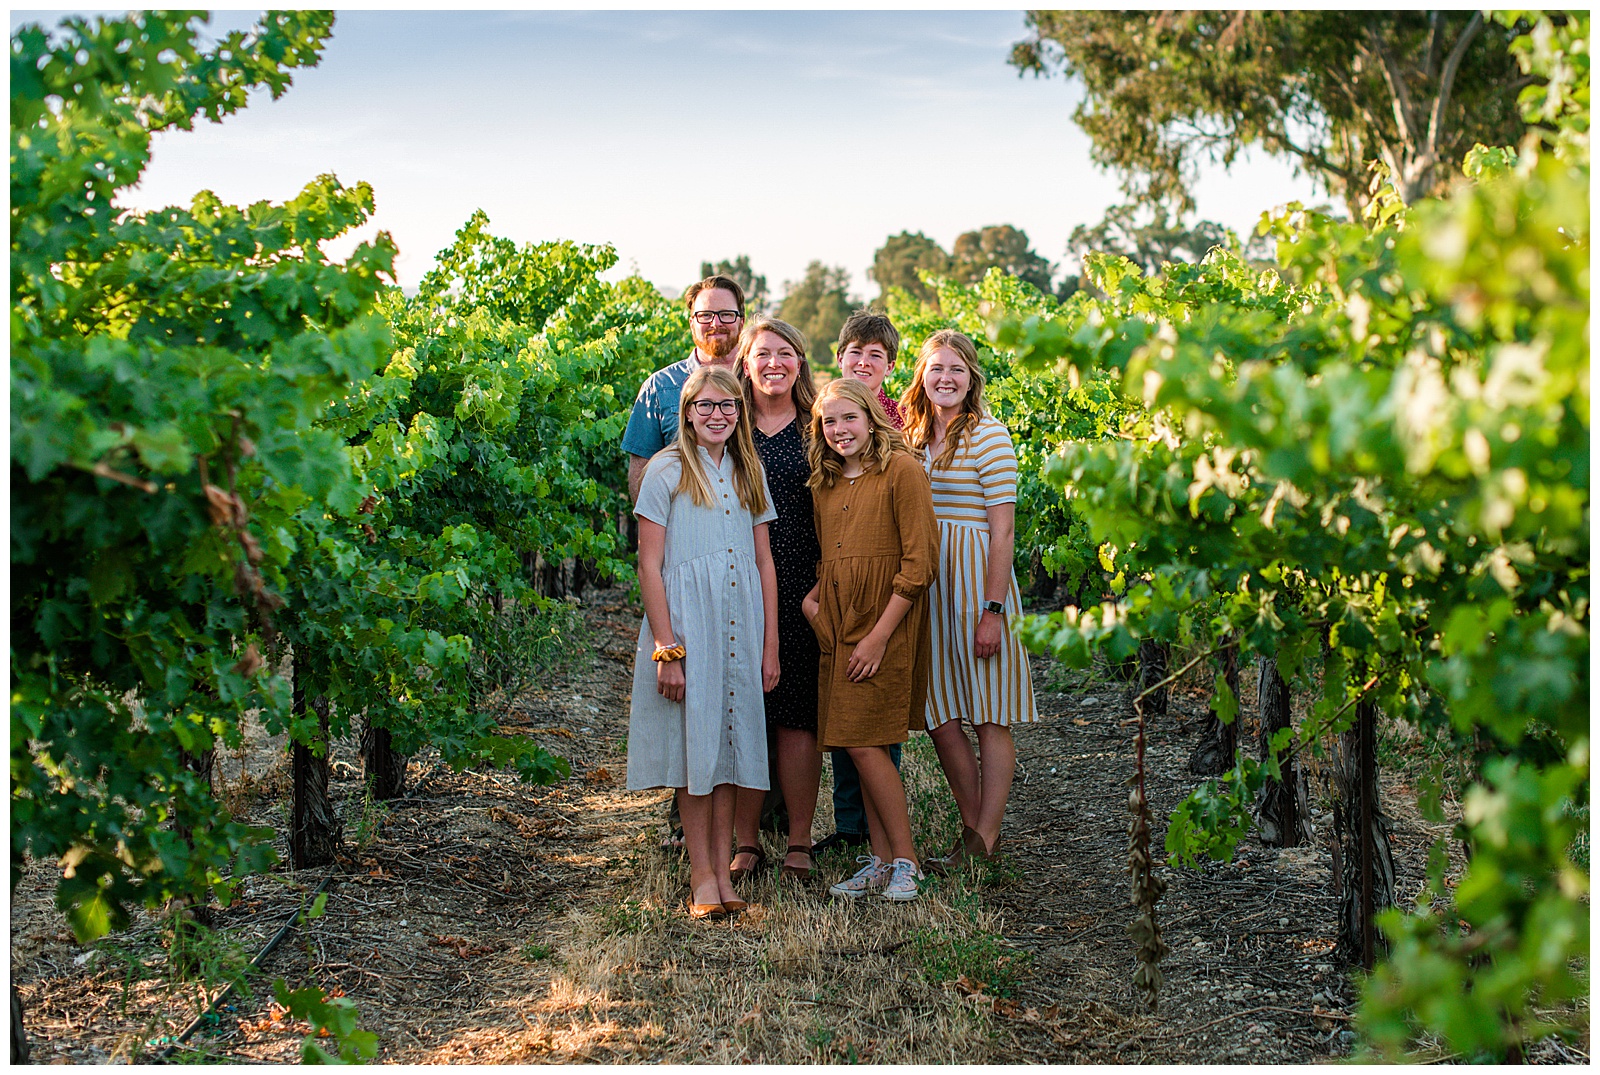 Family photoshoot at golden hour in vineyards in Livermore, CA